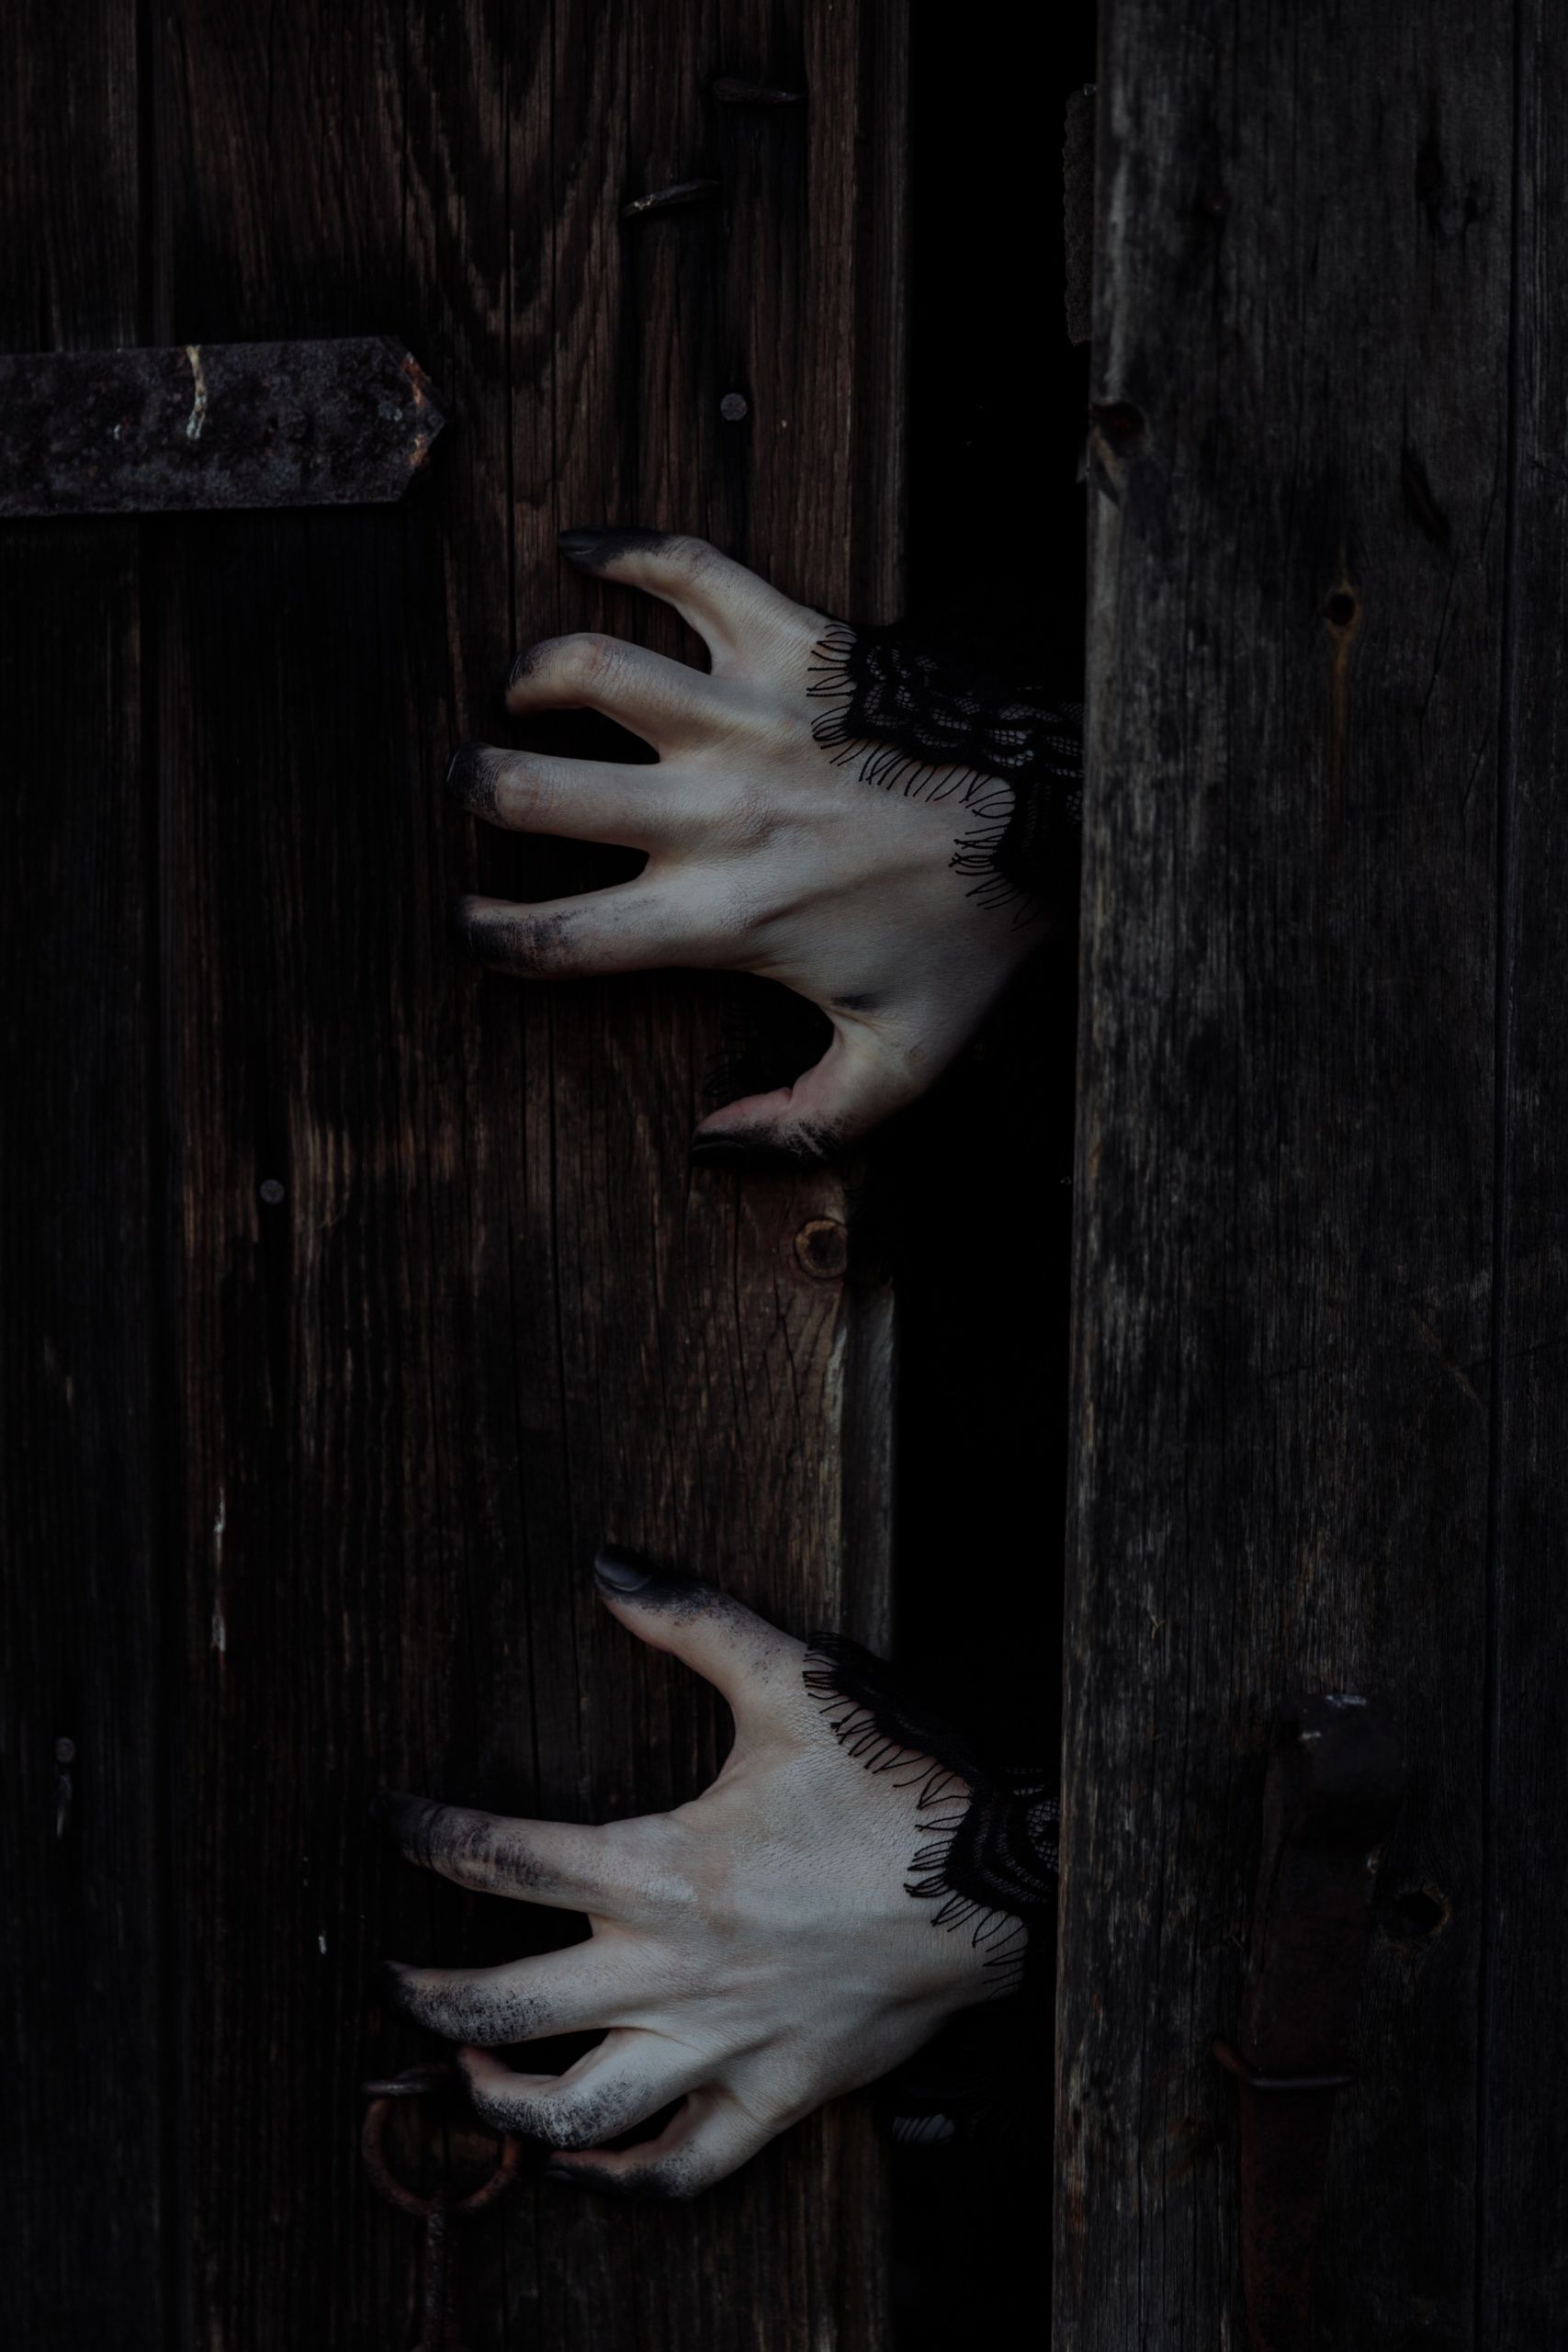 A pair of hands with black fingers and nails are reaching through a wooden door. - Creepy